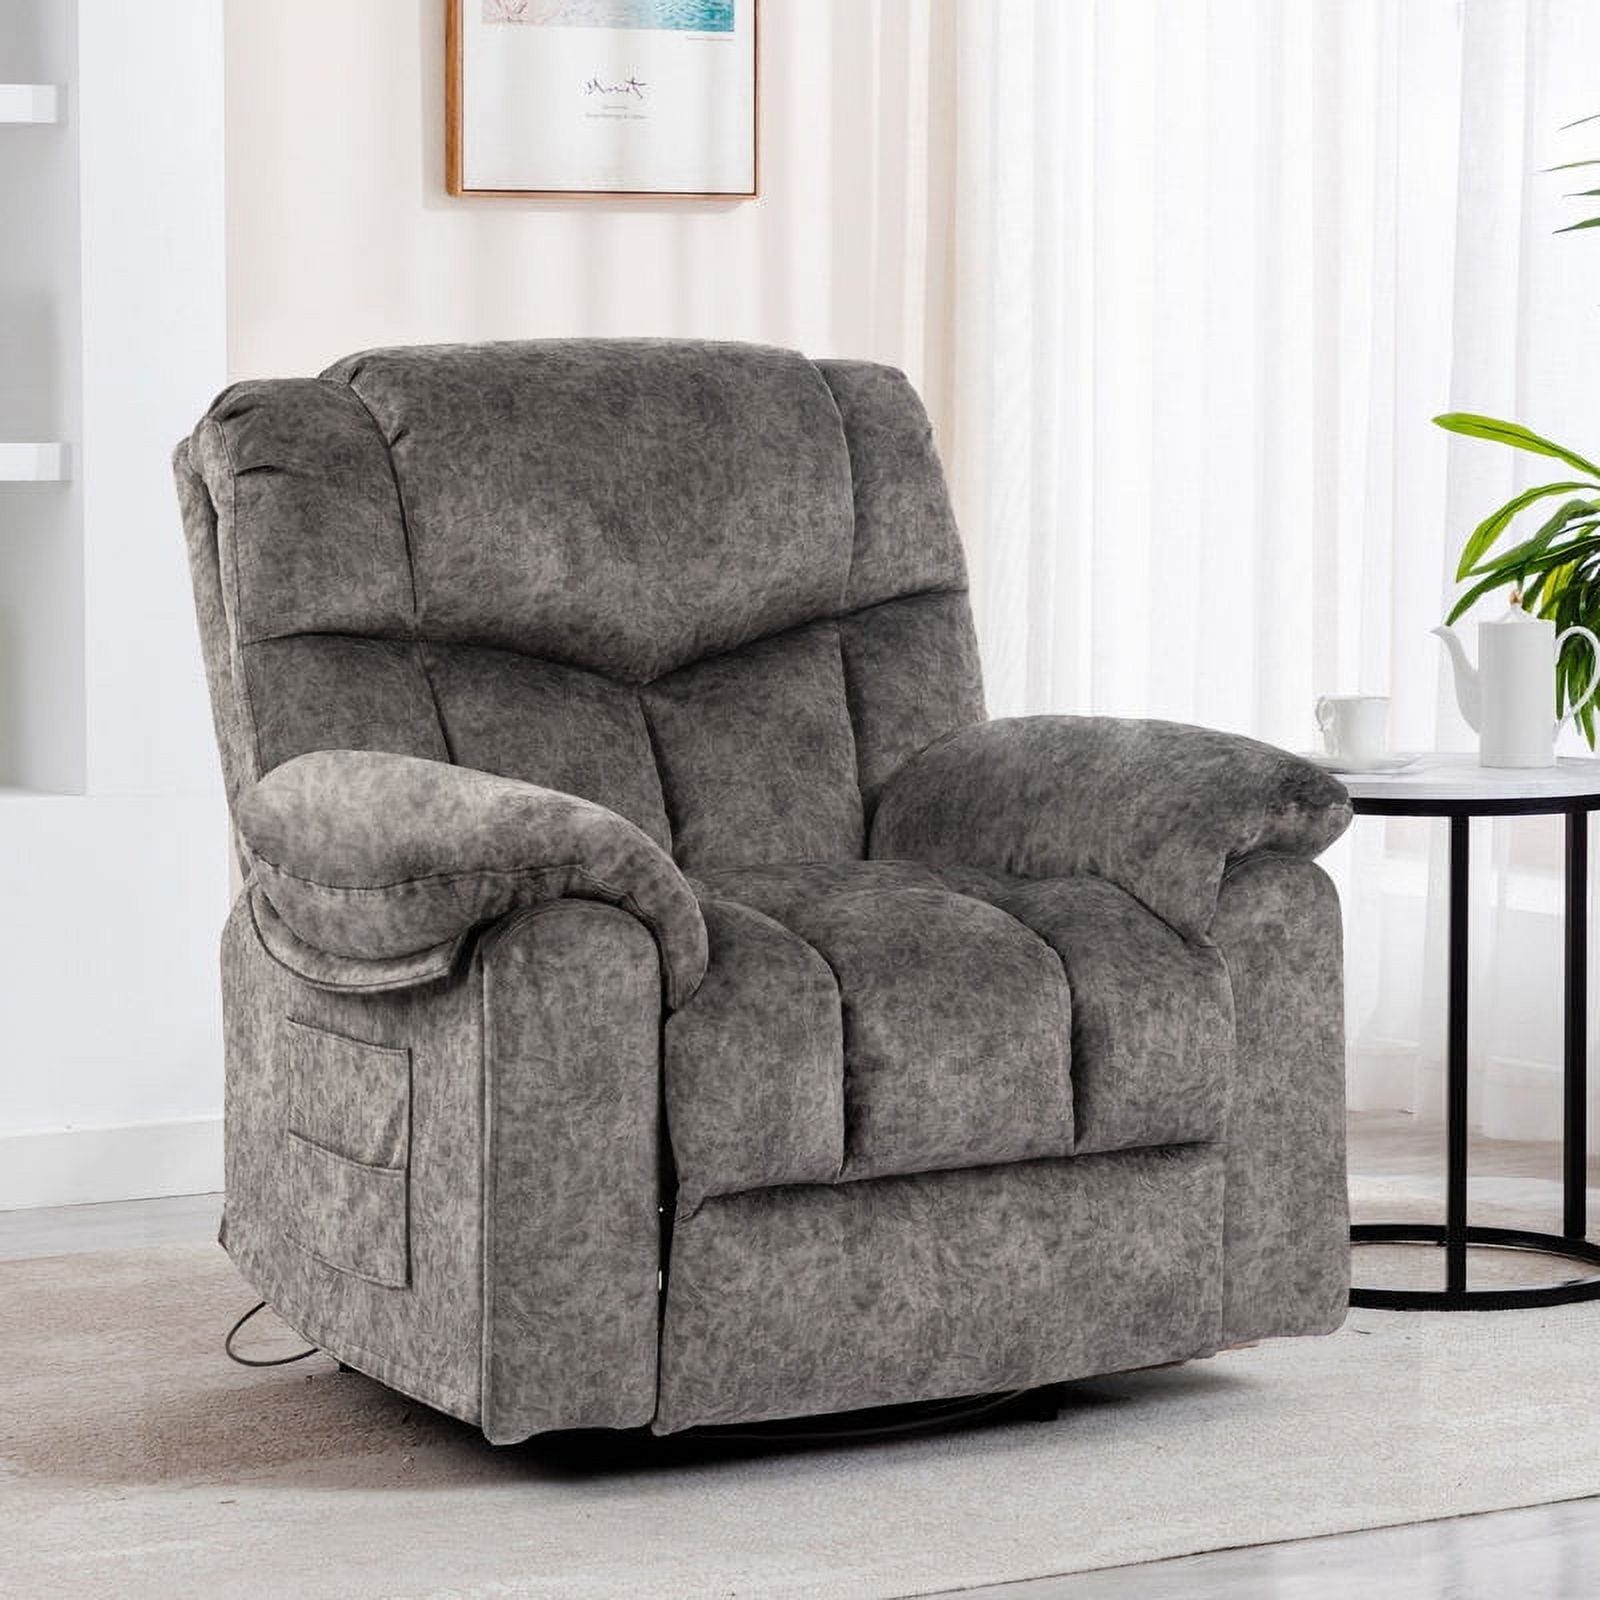 Colerline 35.43" Wide Modern Velvet Upholstered Heating & Massage Swivel  Reclining Rocker Chair With Hidden Cupholders For Living Room And Bedroom,  Gray – Walmart Inside Modern Velvet Upholstered Recliner Chairs (Photo 3 of 15)